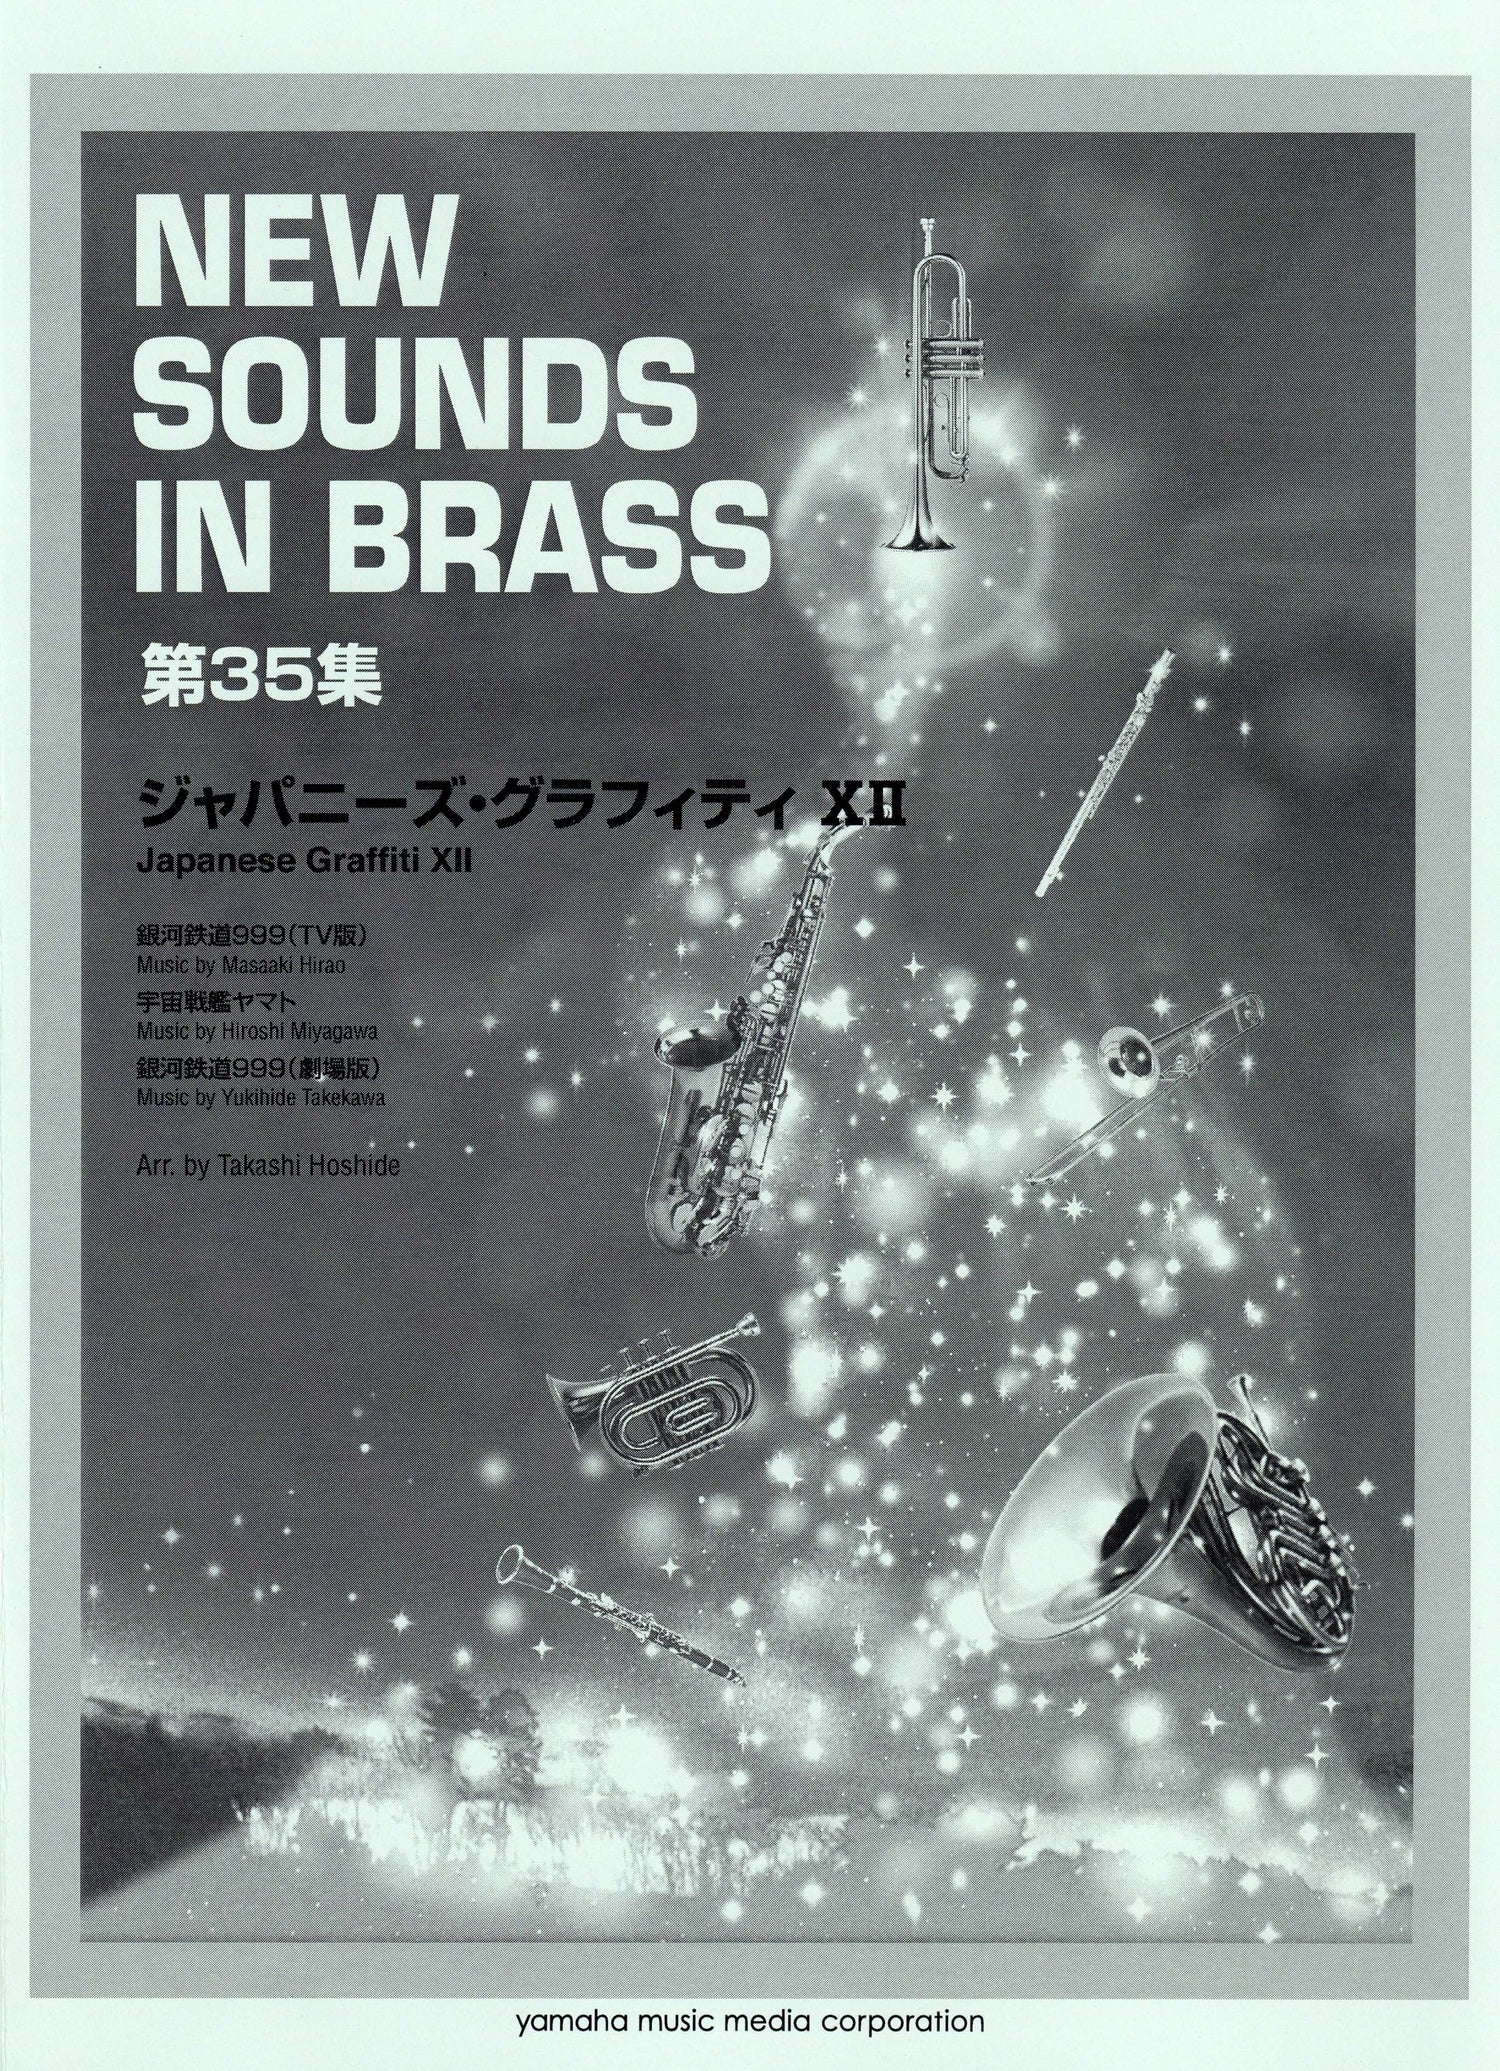 New Sounds in BRASS ジャパニーズ・グラフィティ XII 復刻版